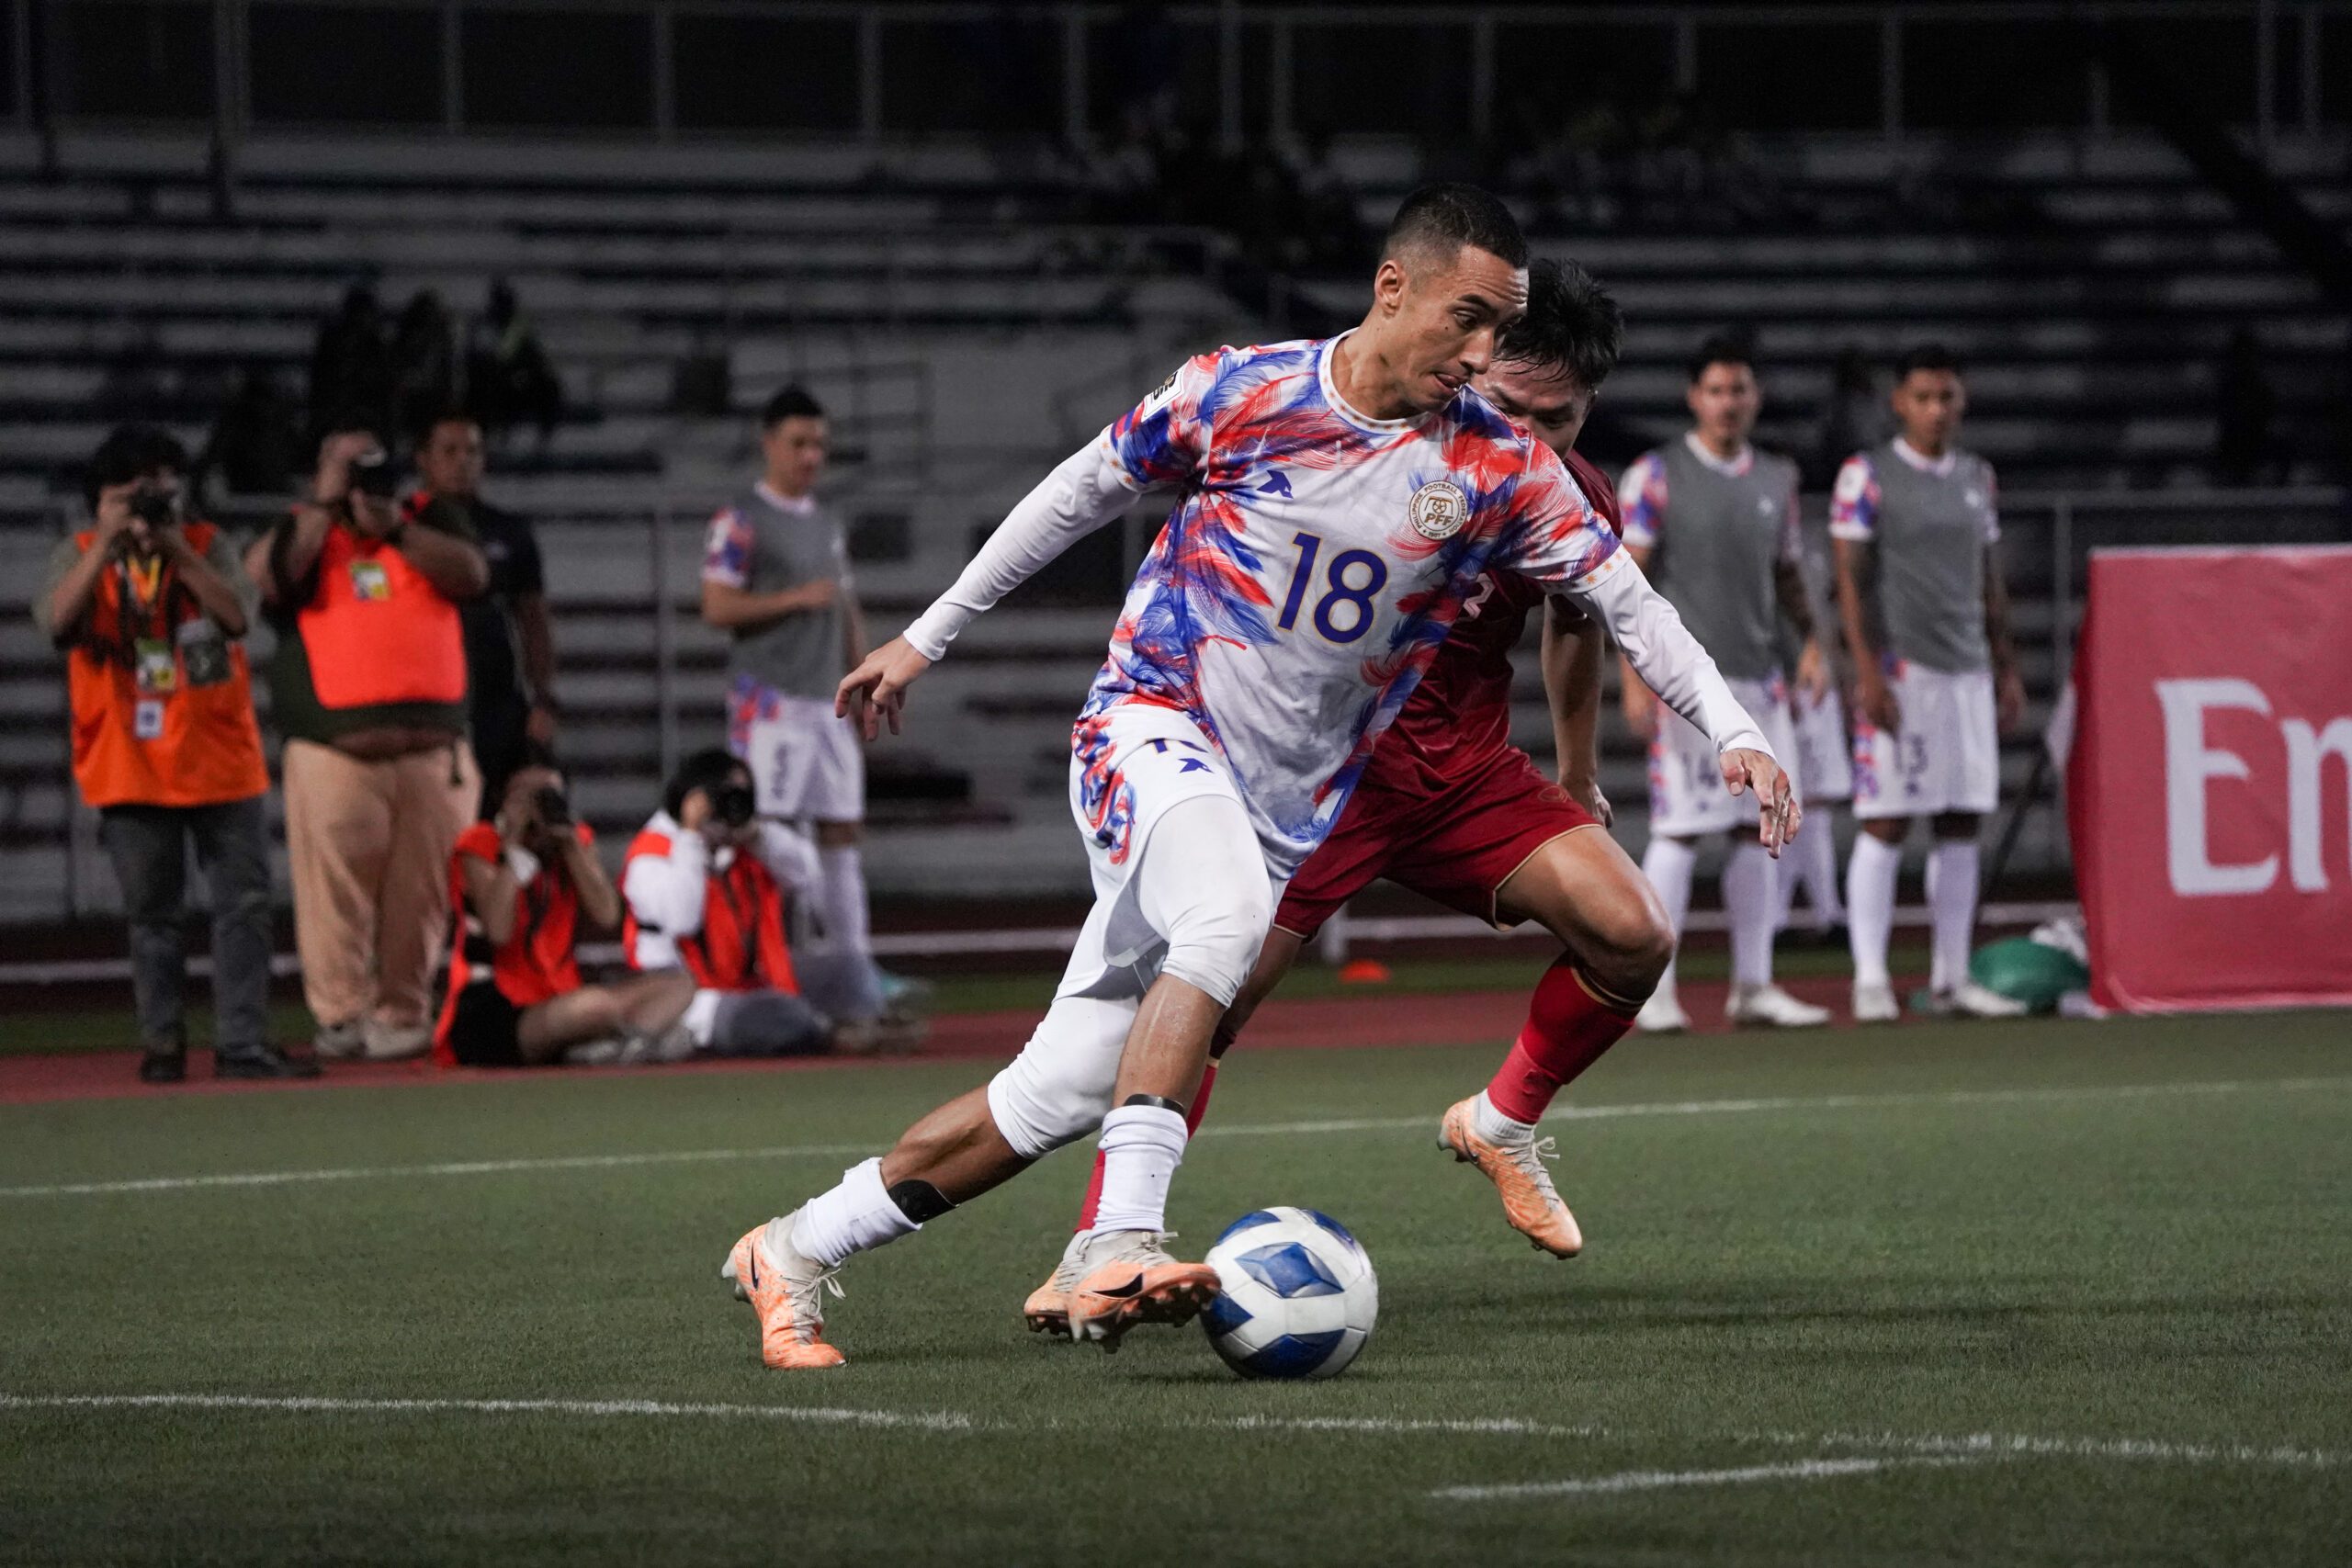 Azkals, Indonesia settle for draw in thrilling World Cup, Asian Cup joint qualifier